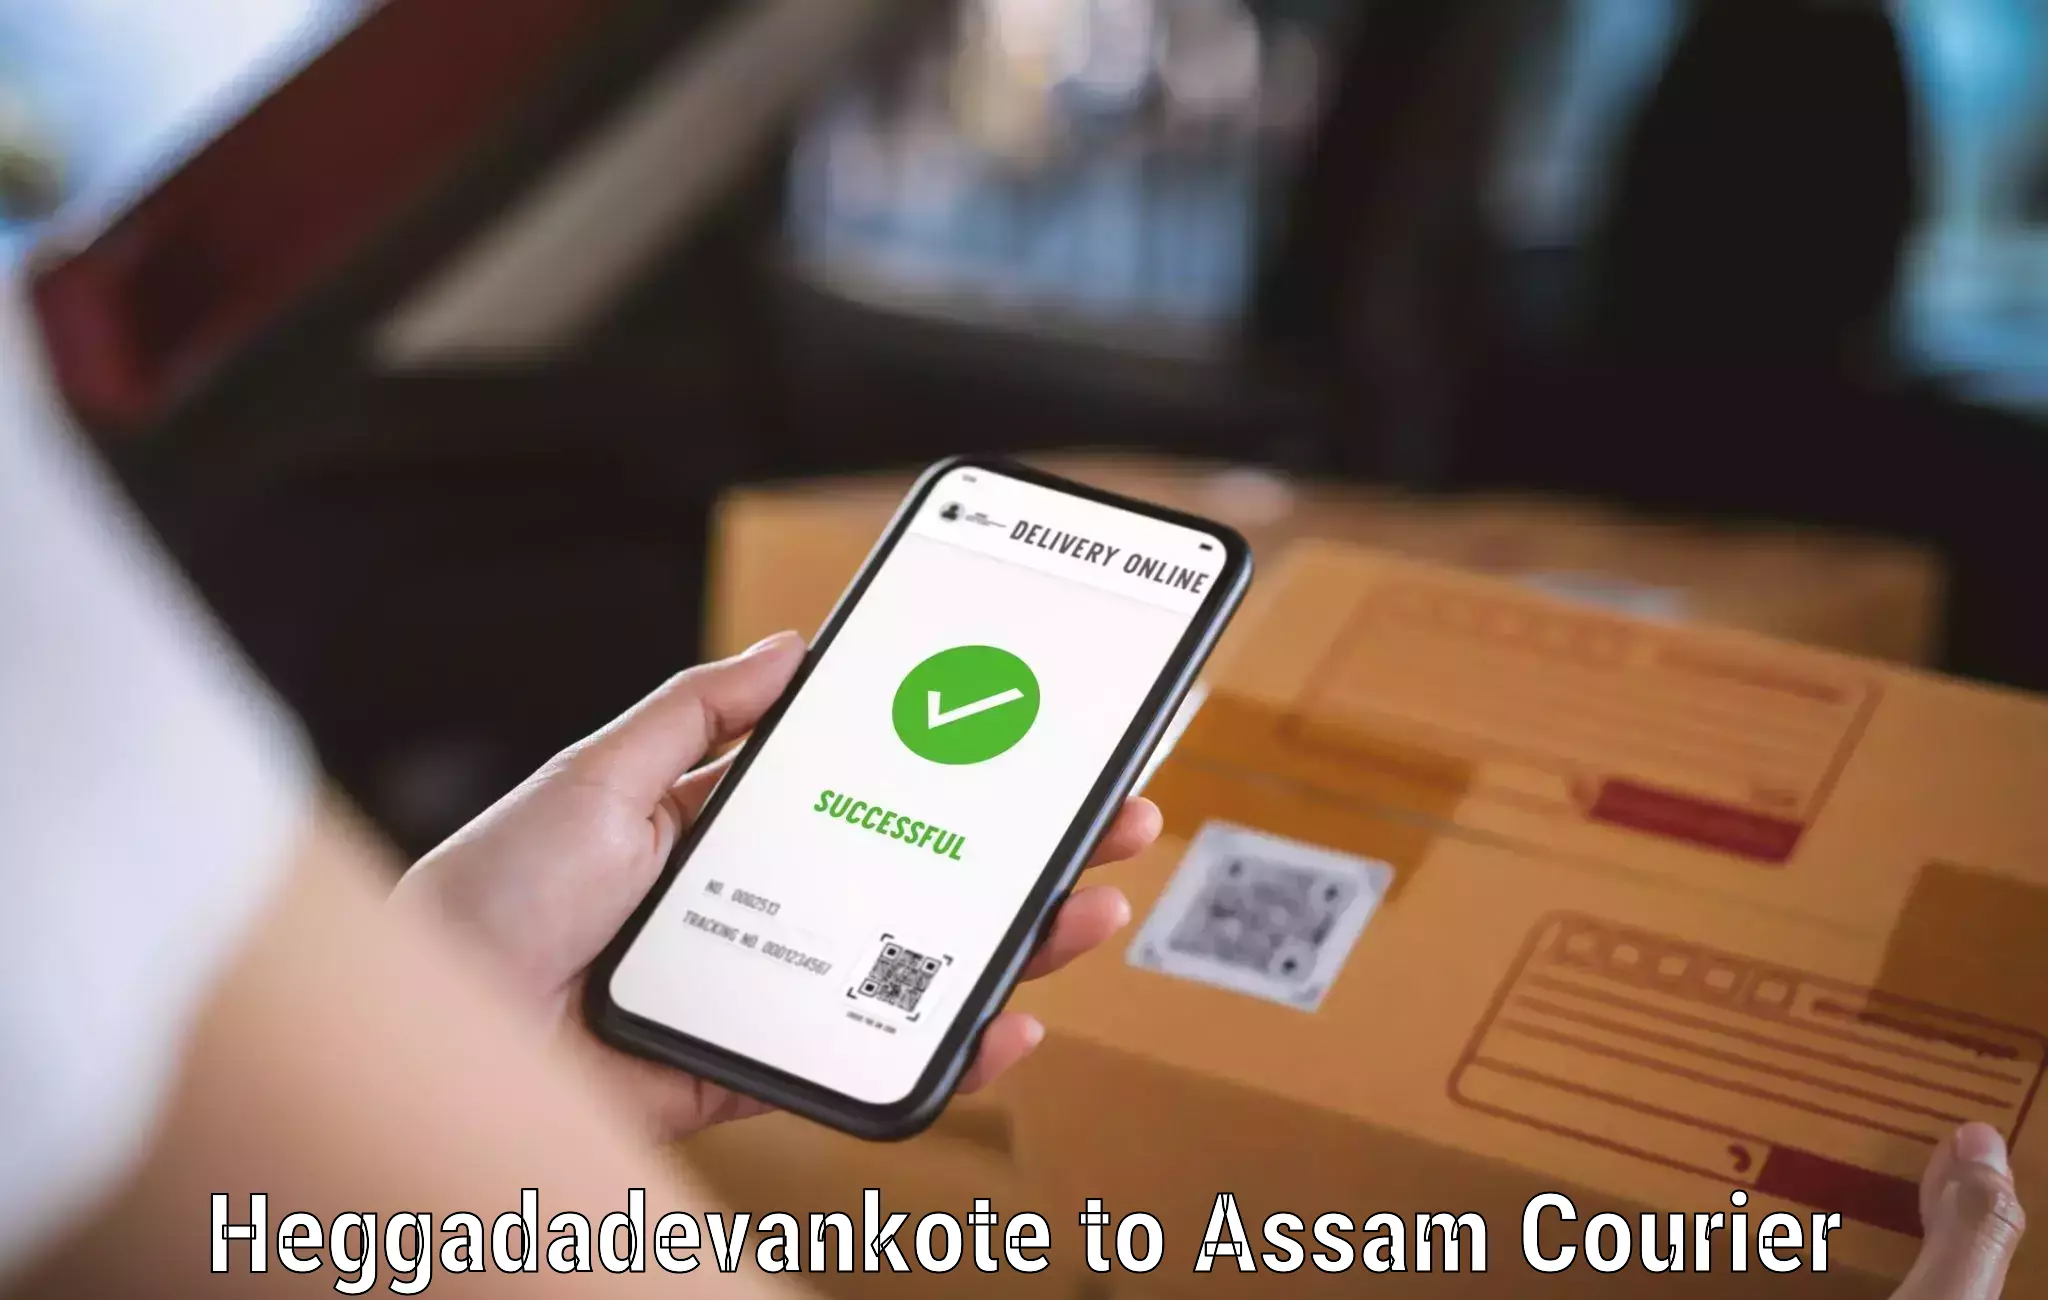 Secure package delivery Heggadadevankote to Lala Assam